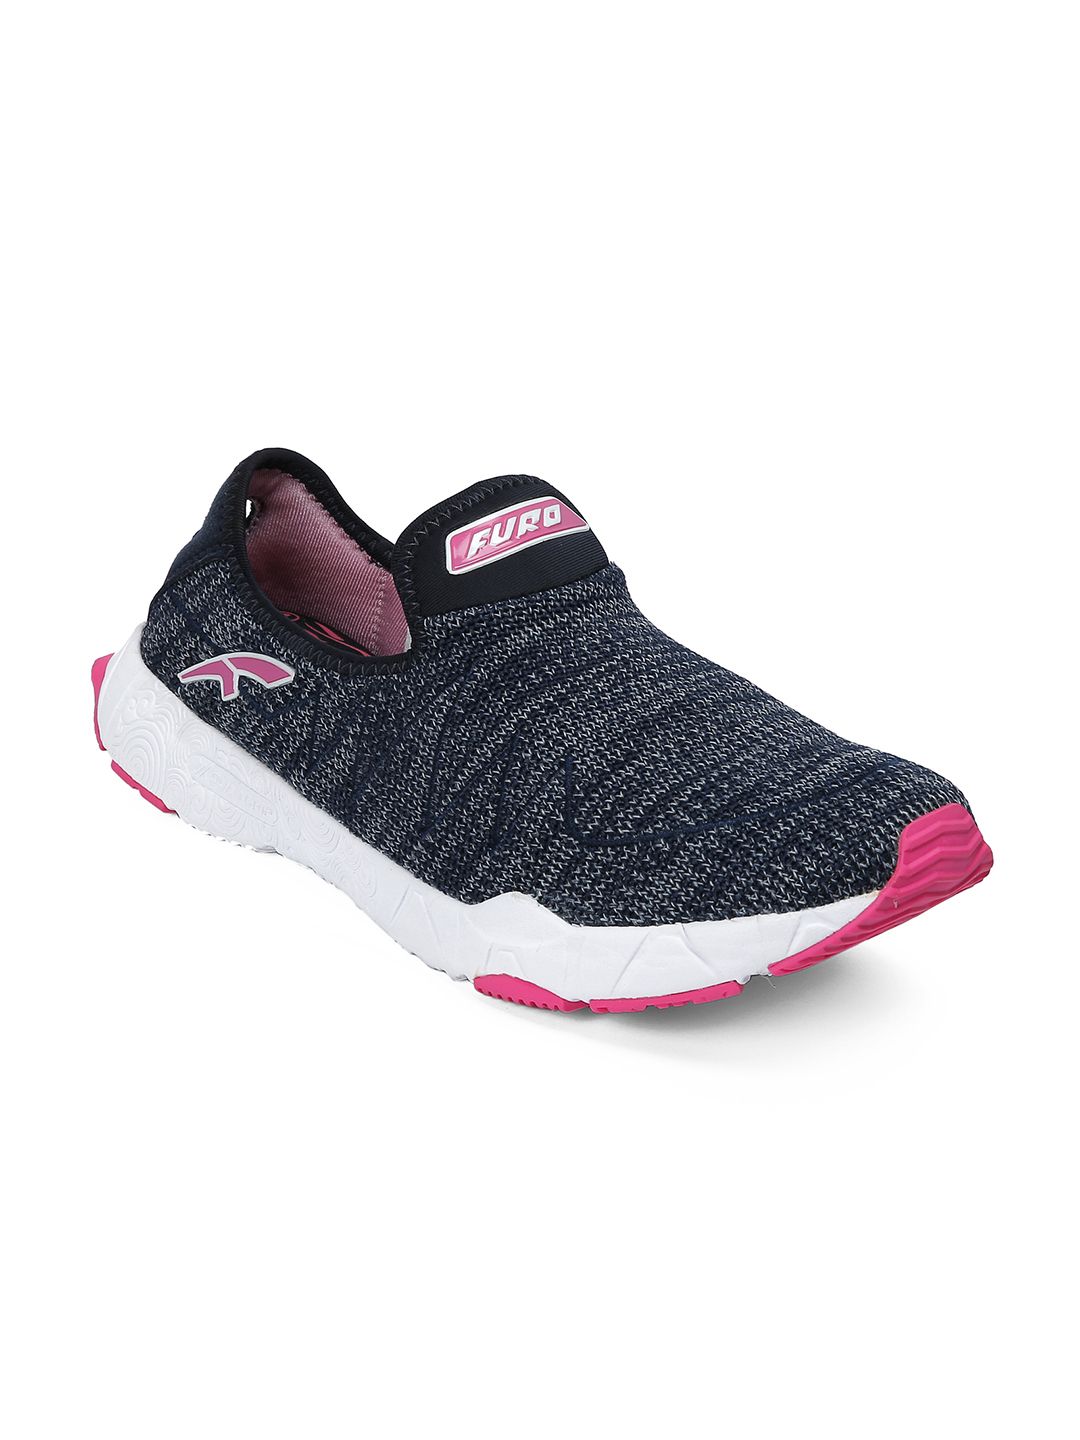 FURO by Red Chief Women Black Running Shoes Price in India